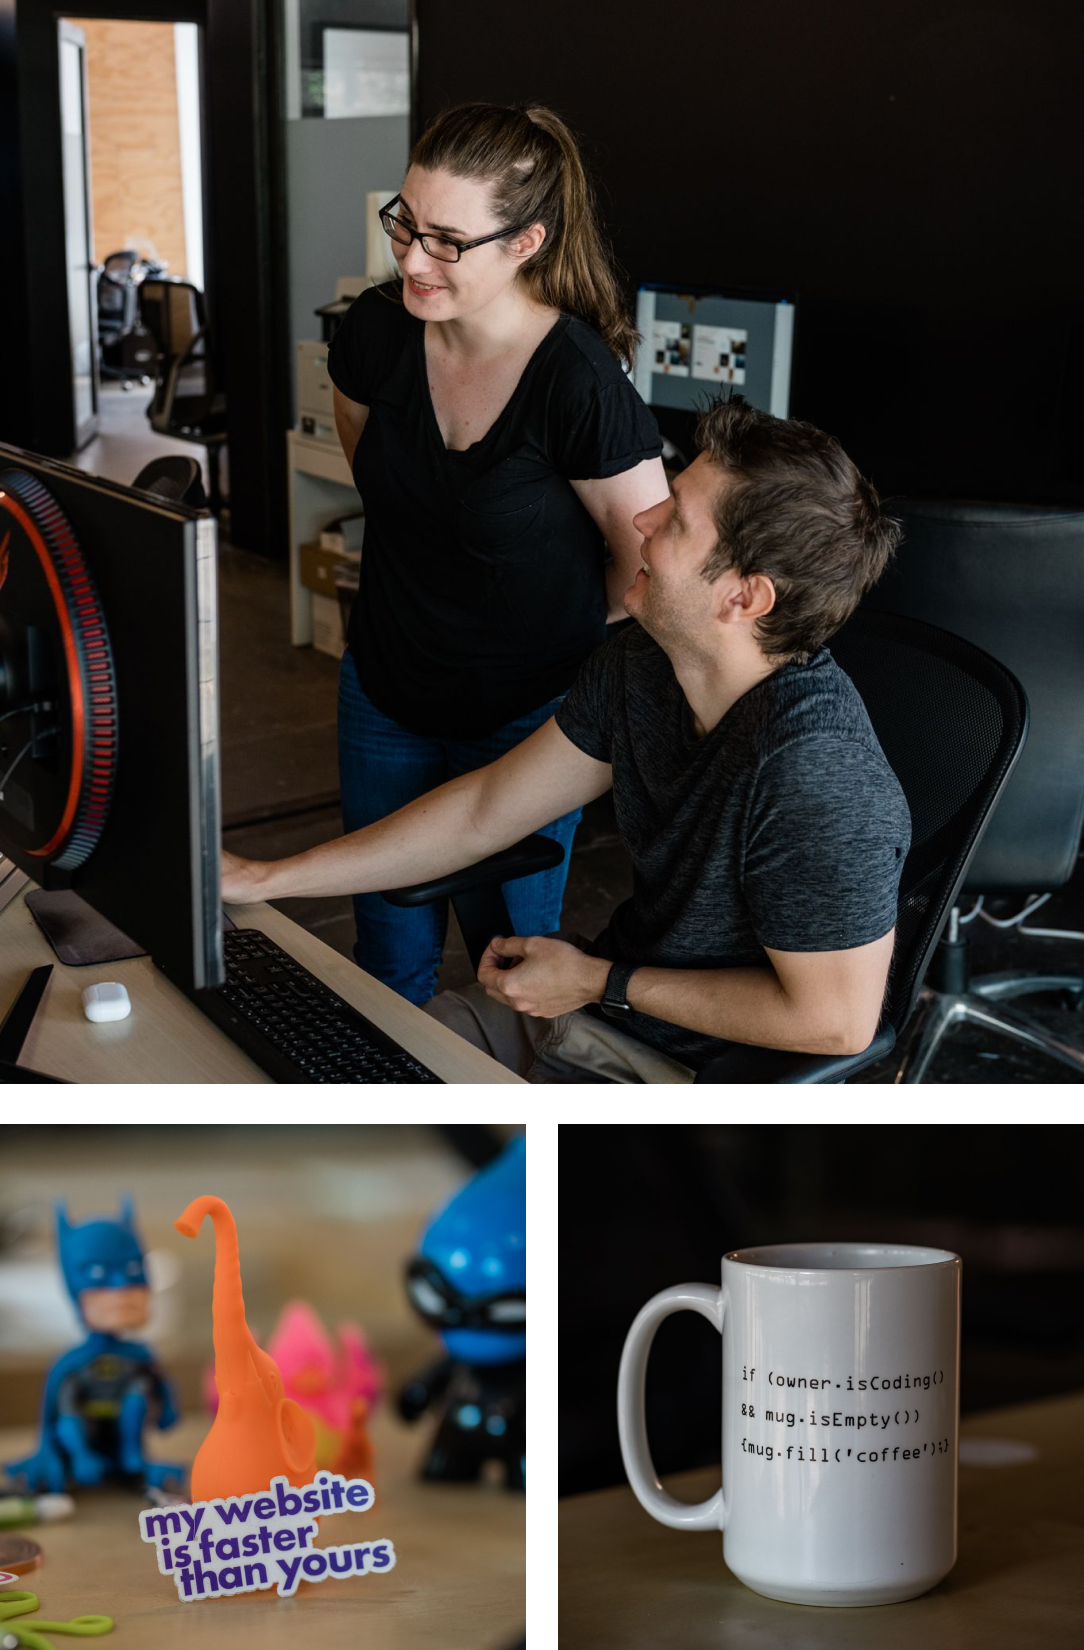 A collage of 3 photos. The first is of Senior Developer Manager, Jennifer Dust, and Back-end Developer Travis Tomka, collaborating at a desk. The second is a close-up of toys on a desk with a sticker that says "My website is faster than yours.". The third is a close-up of a coffee mug with source code printed on it that reads "if (owner.isCoding() && mug.isEmpty()) {mug.fill('coffee');}".